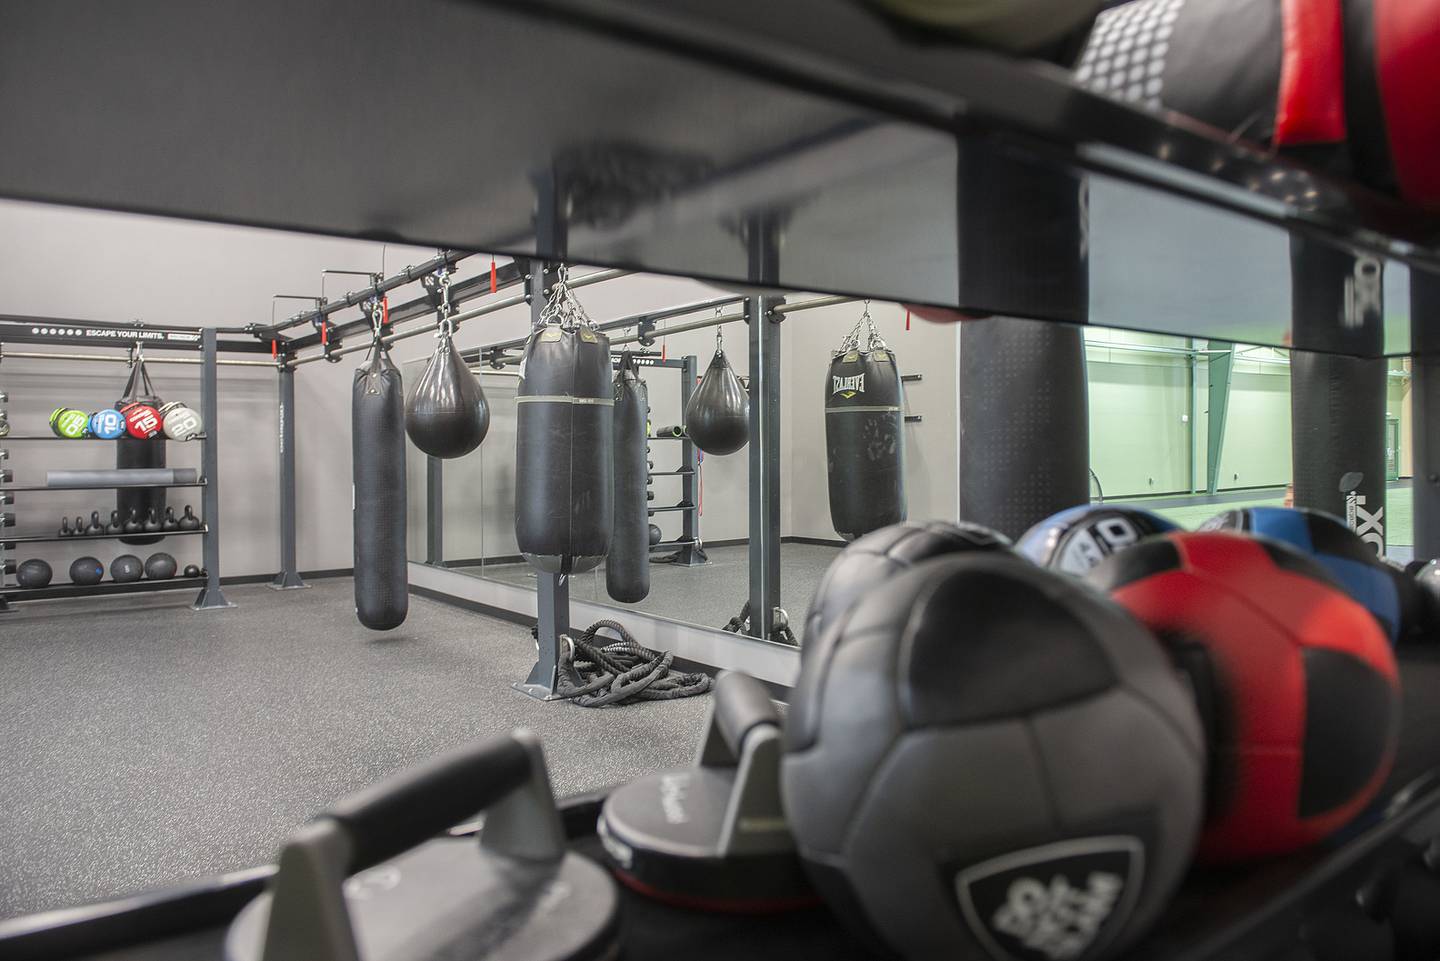 With the popularity of MMA, High Intensity Interval Training has become a desired form of exercise.